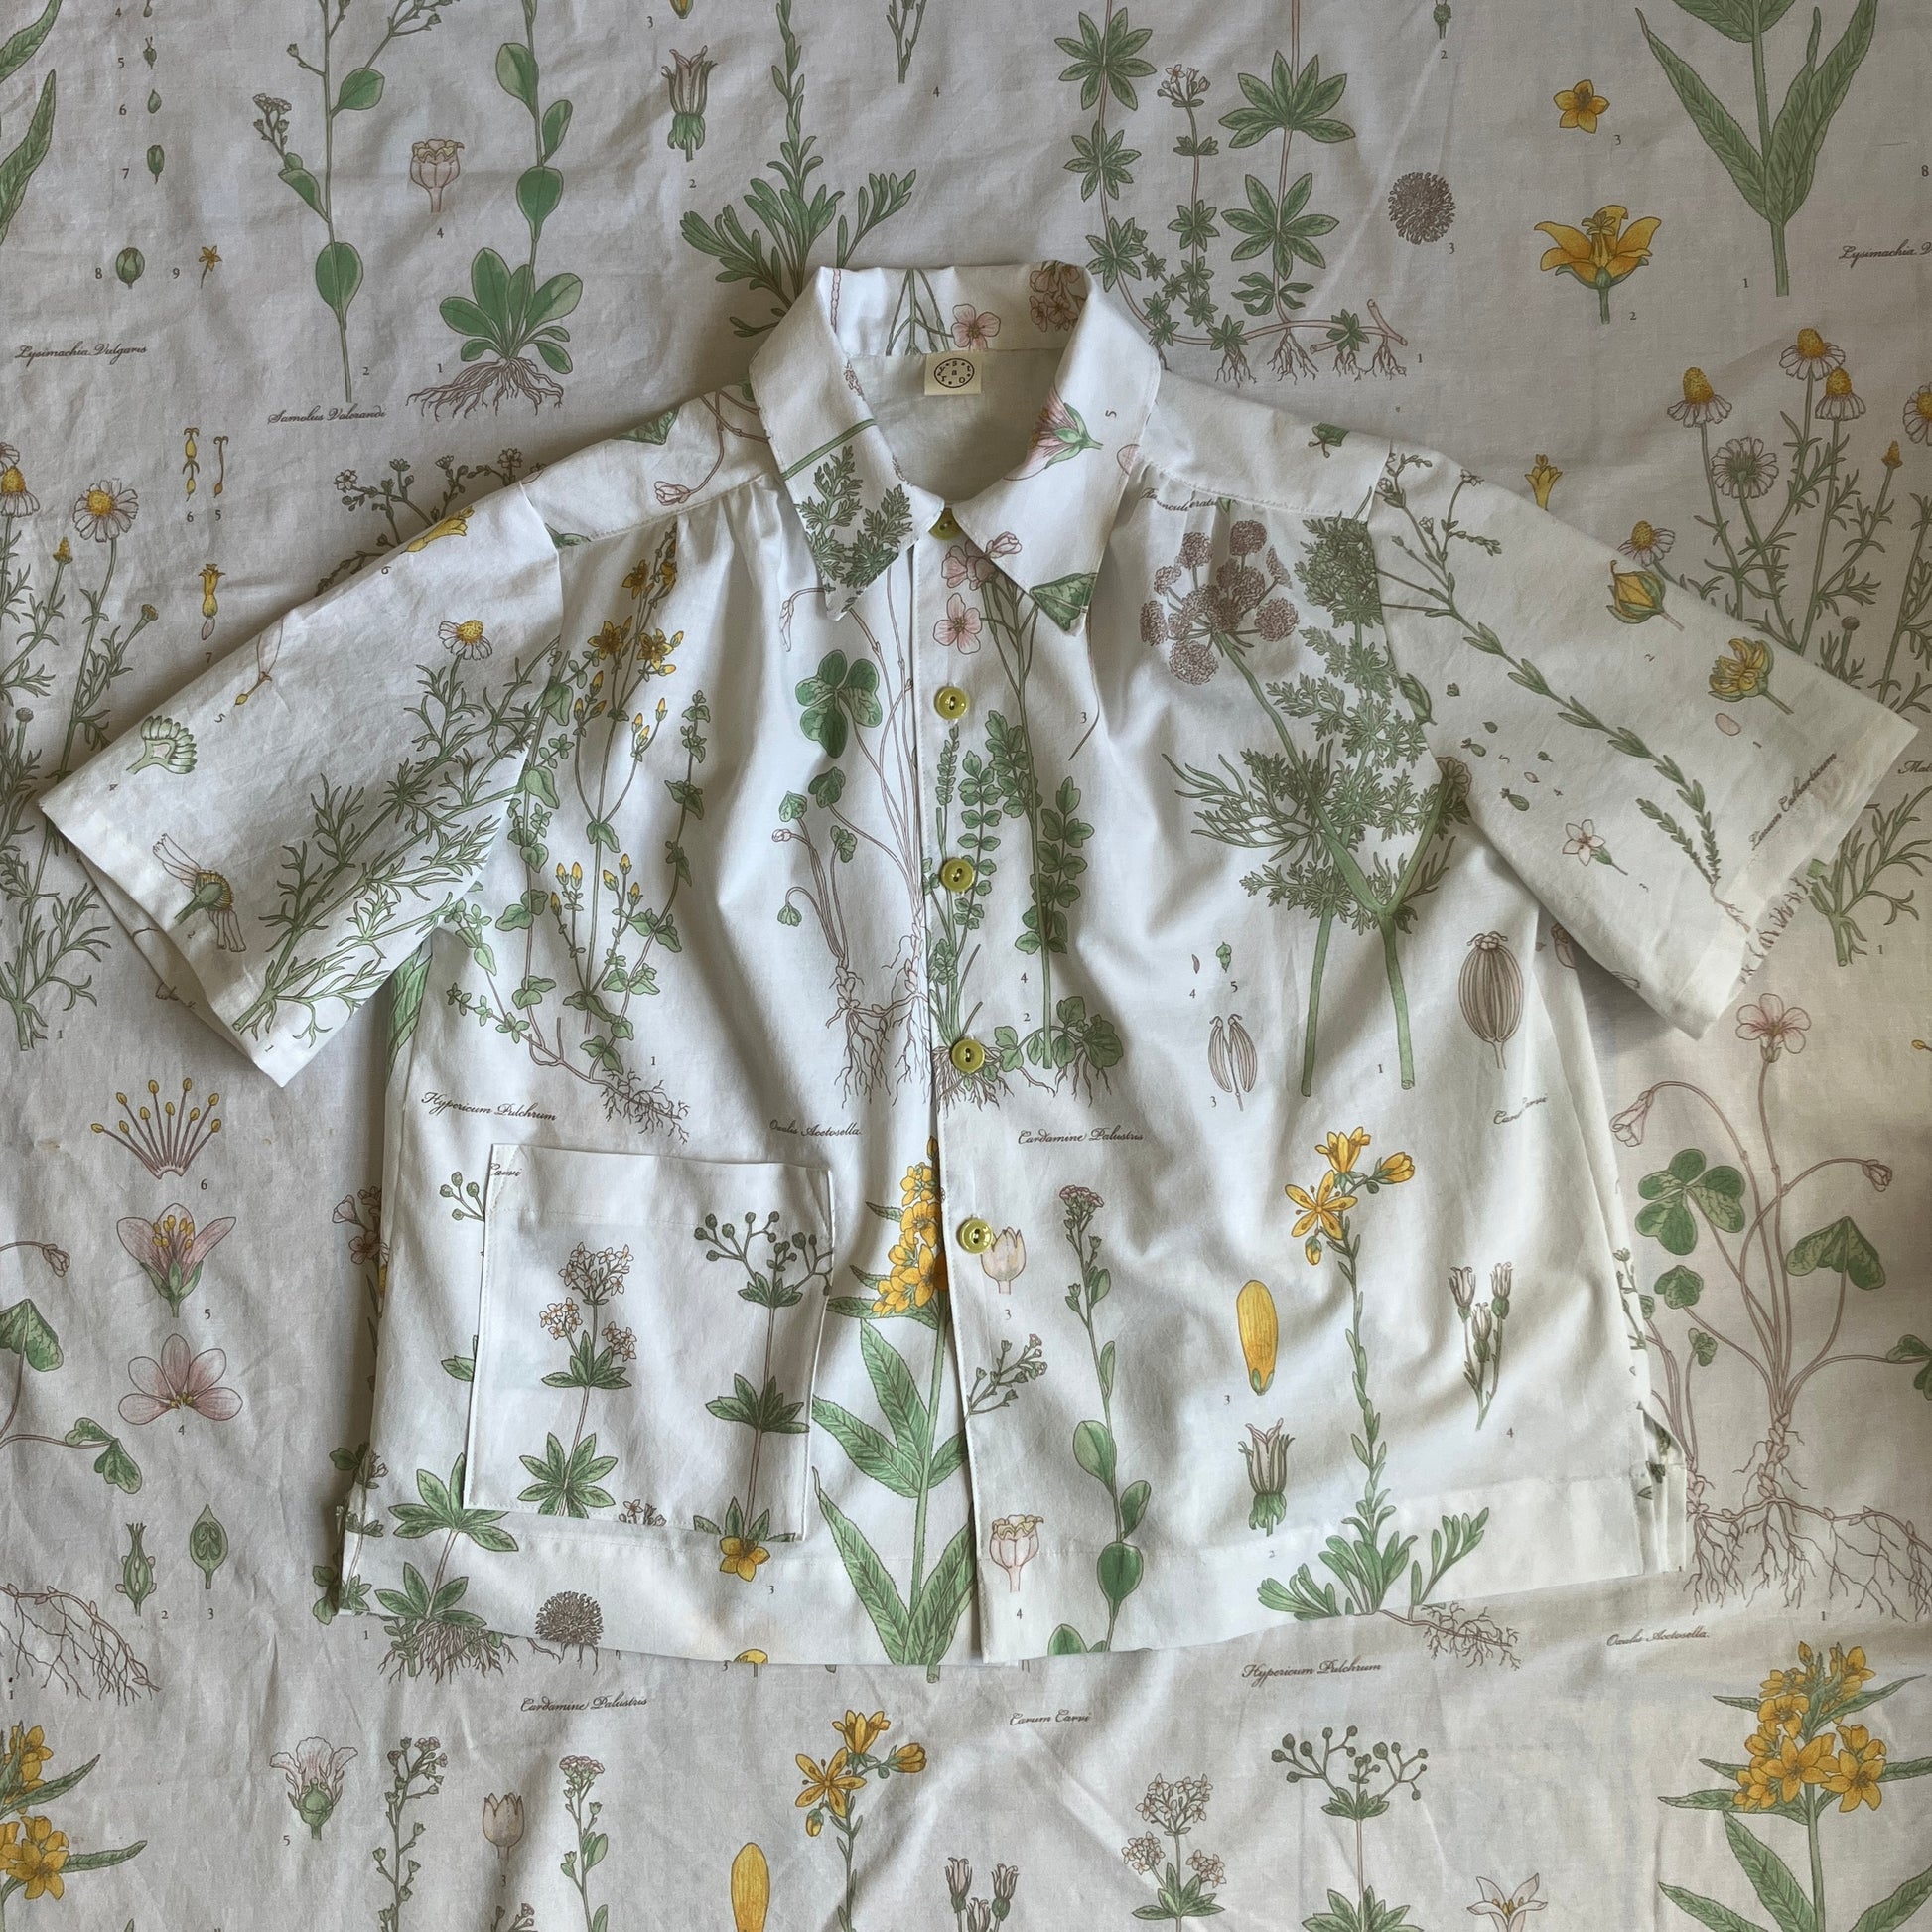 botanical print shirt made from recycled vintage bedding